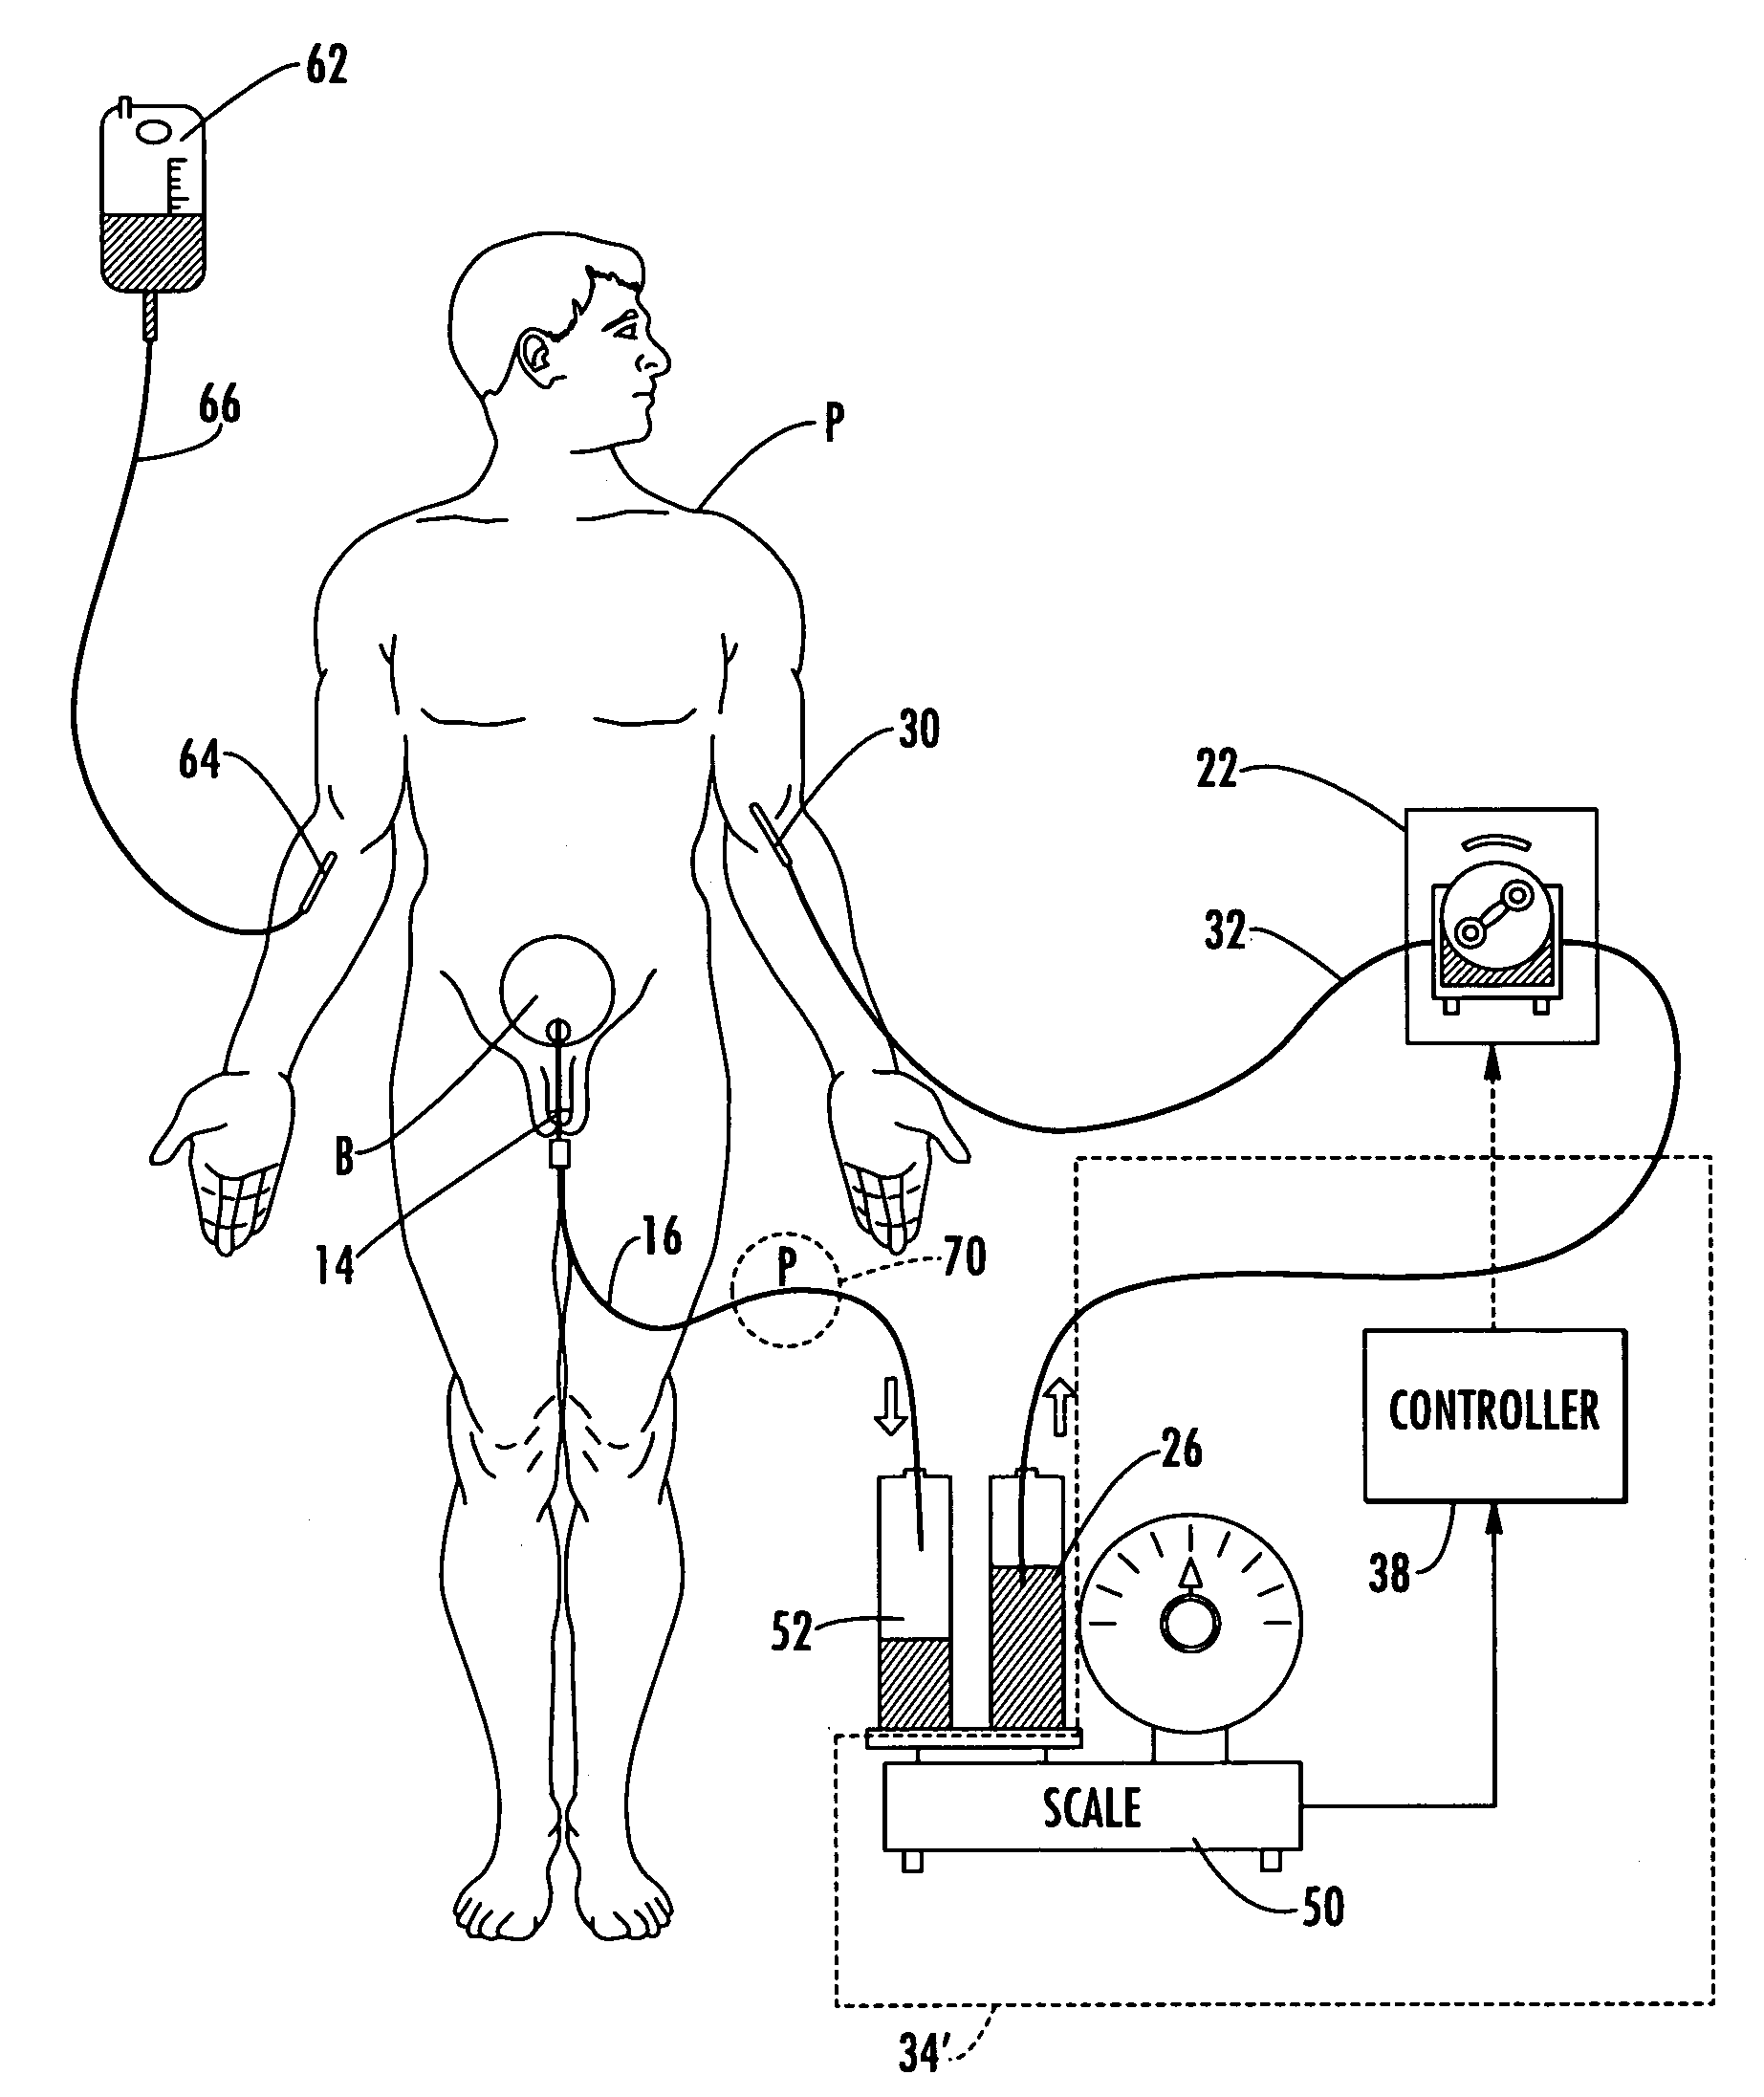 Patient hydration system with a redundant monitoring of hydration fluid infusion